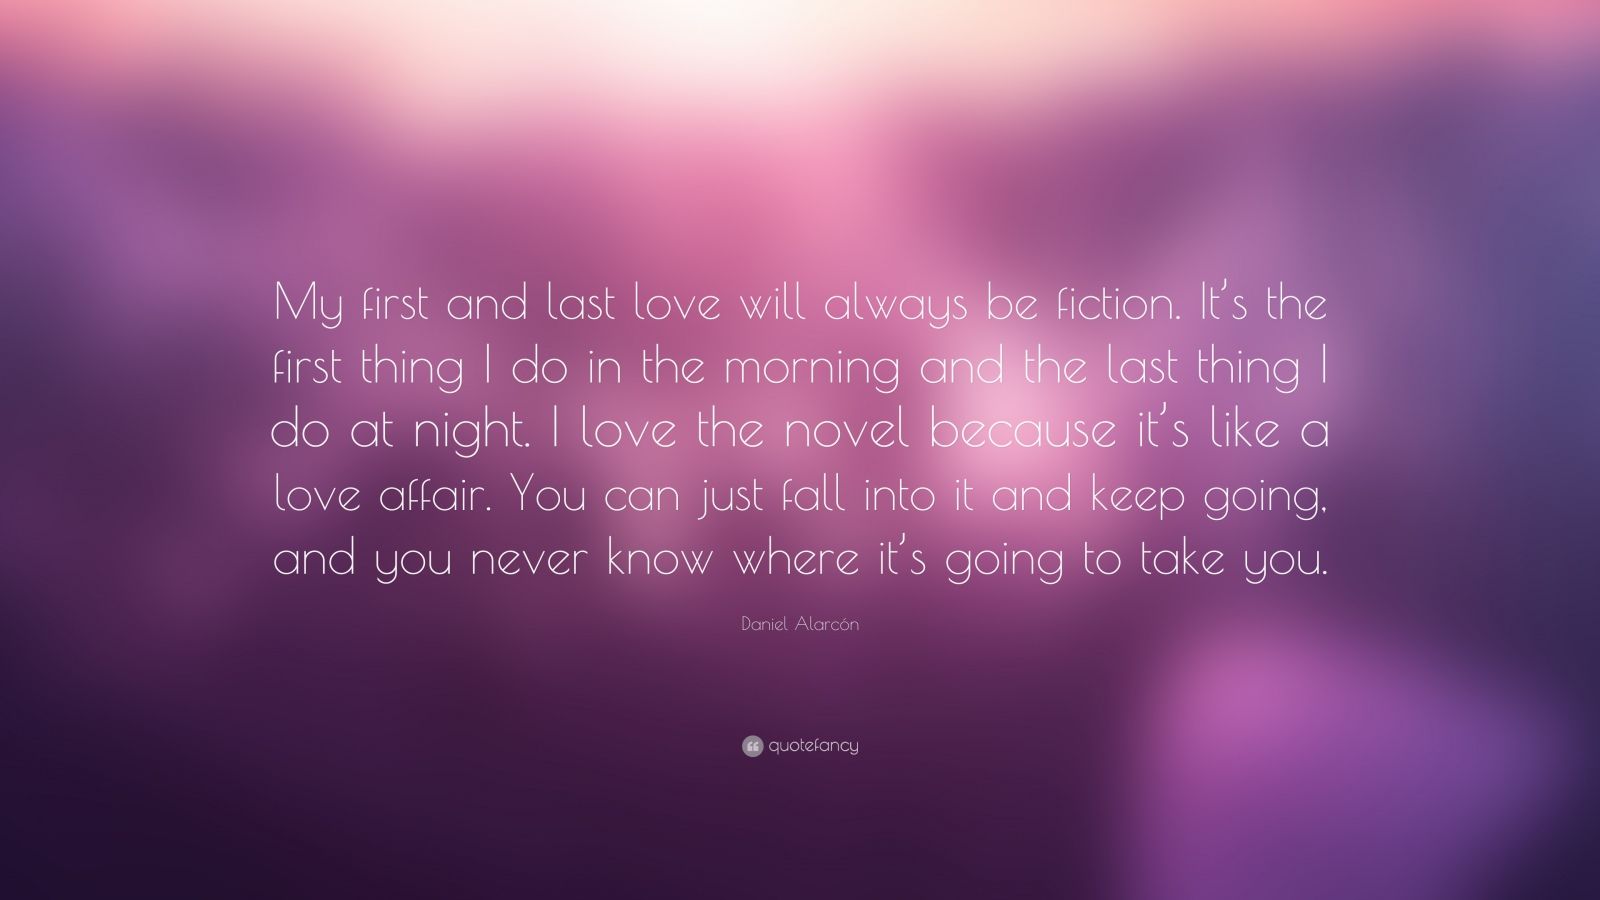 Daniel Alarcón Quote: “My first and last love will always be fiction ...